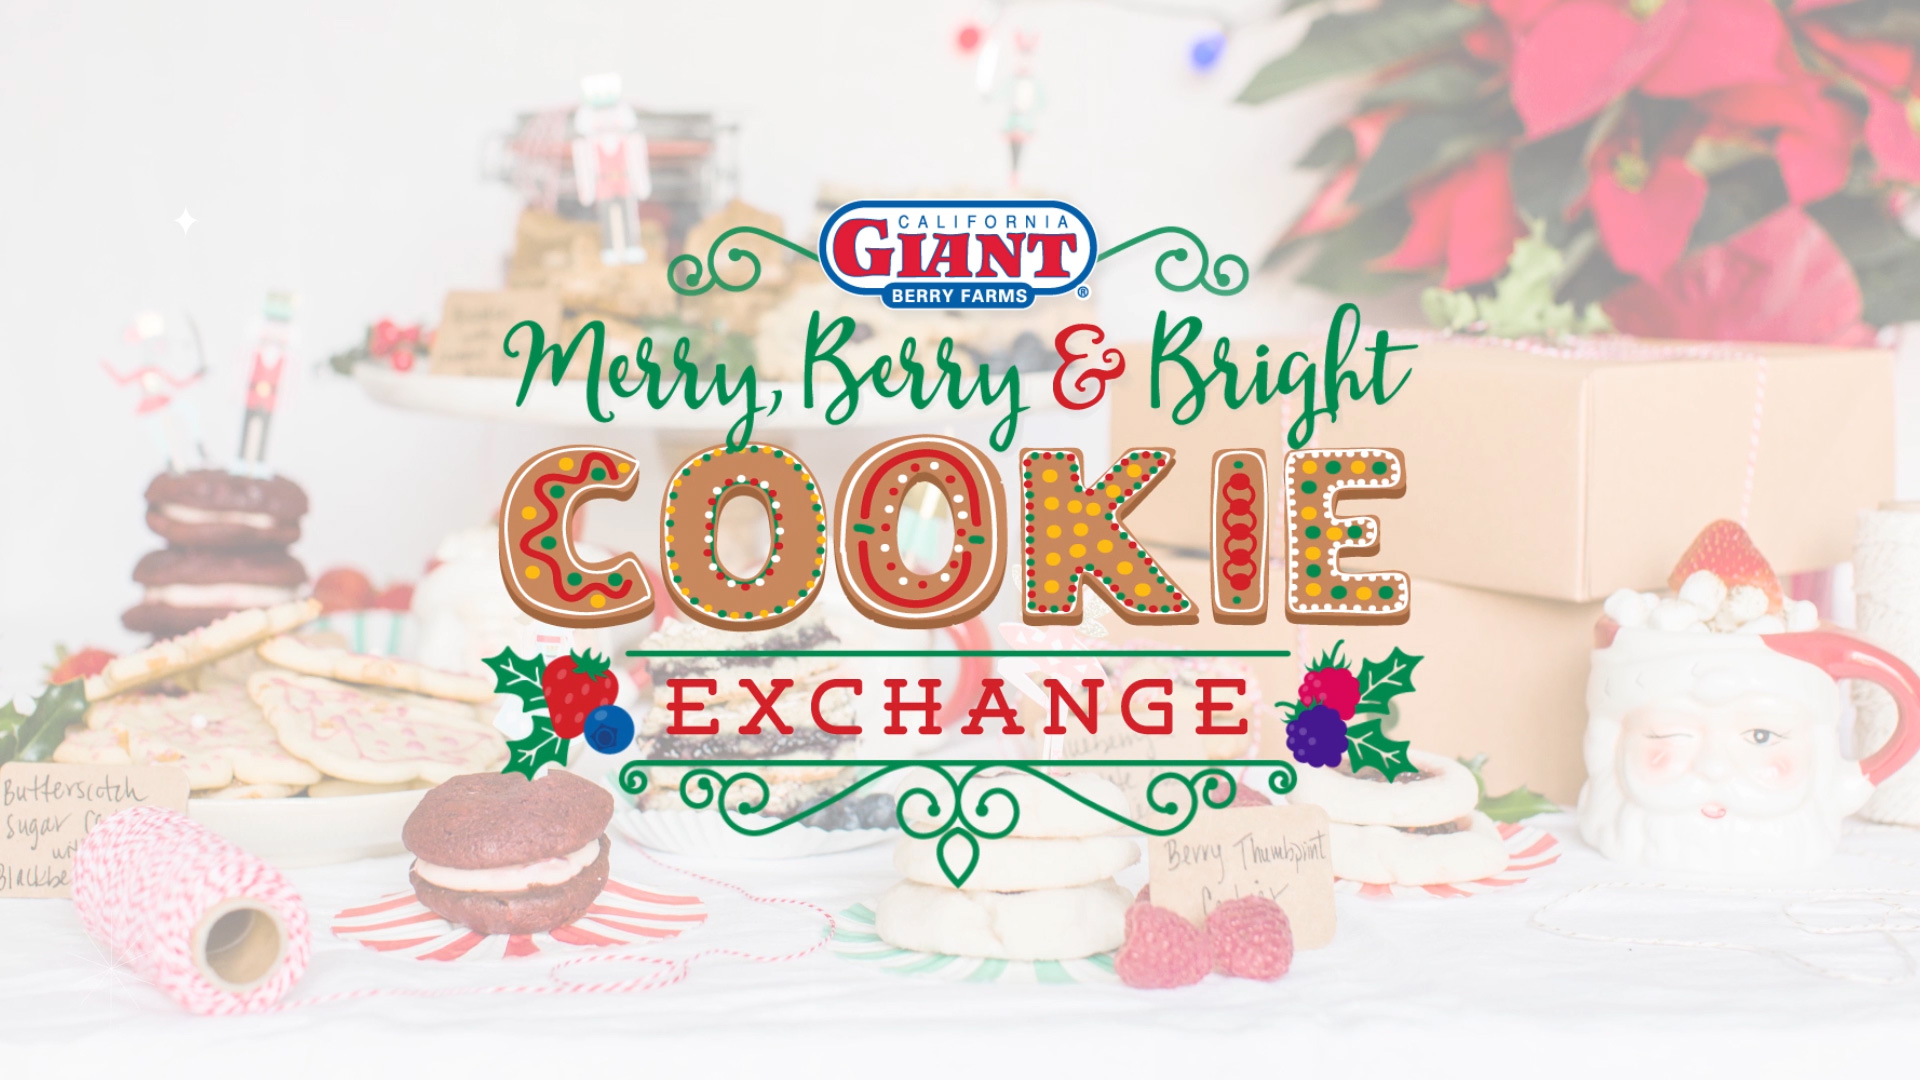 an image of a table set up with holiday cookies and presents with a white overlay on top and a logo that says "Merry, Berry & Bright Cookie Exchange"